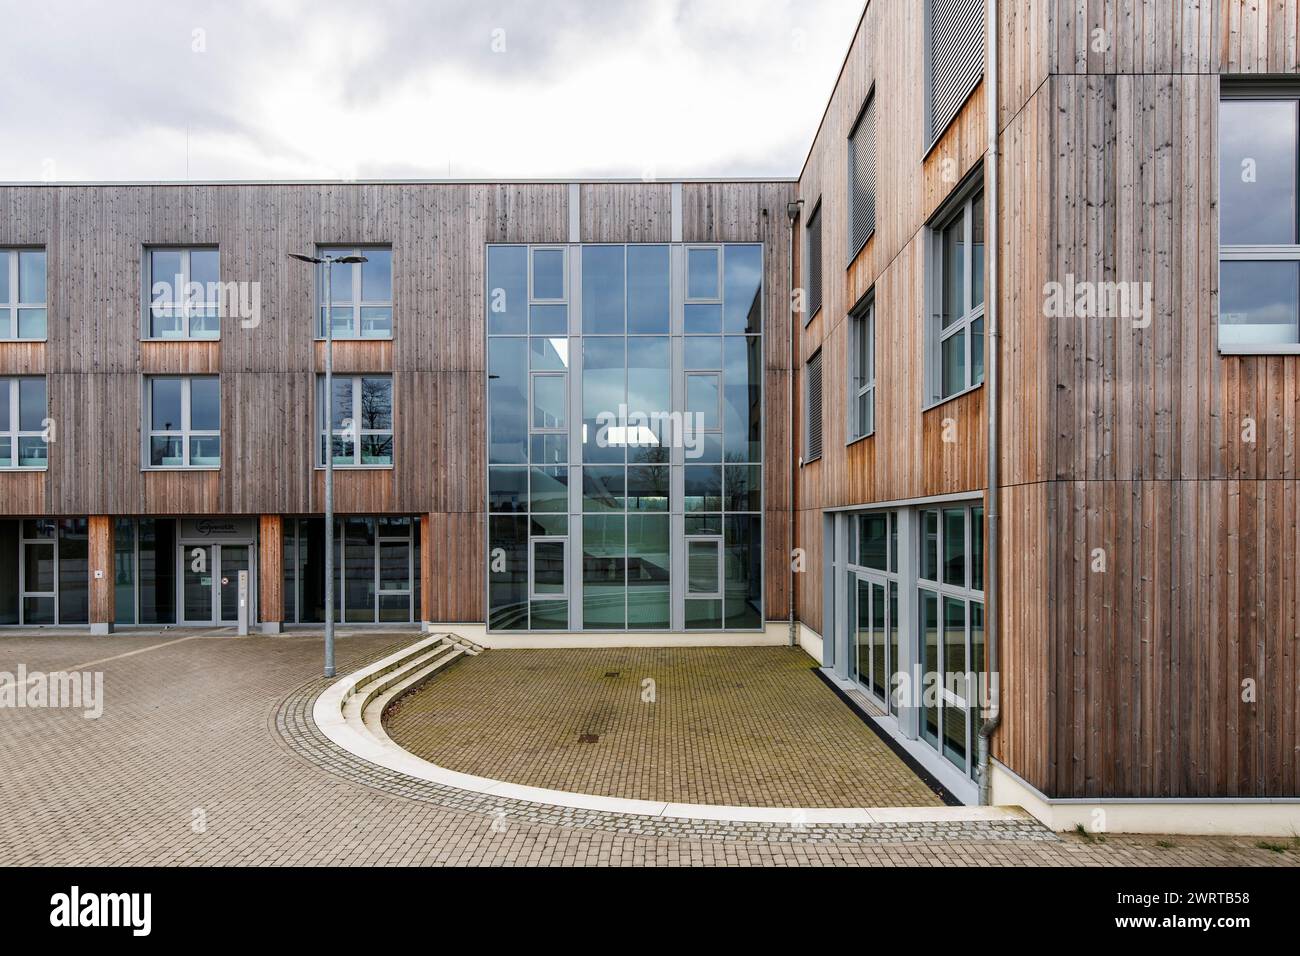 the extension building "Zukunftsraum" of the private university Witten Herdecke in sustainable timber construction, Witten, North Rhine-Westphalia, Ge Stock Photo